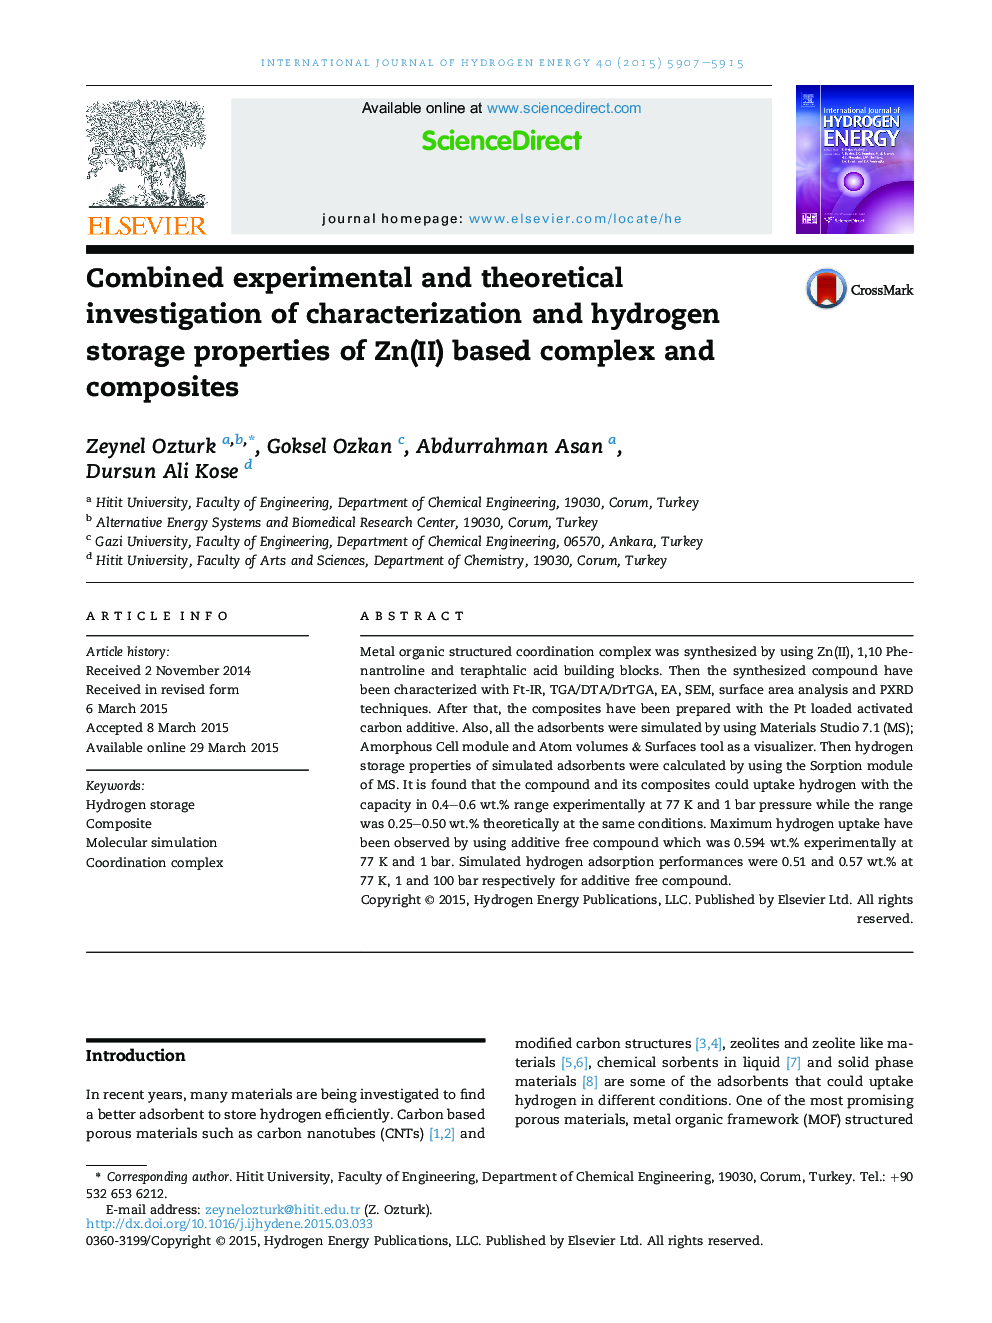 Combined experimental and theoretical investigation of characterization and hydrogen storage properties of Zn(II) based complex and composites